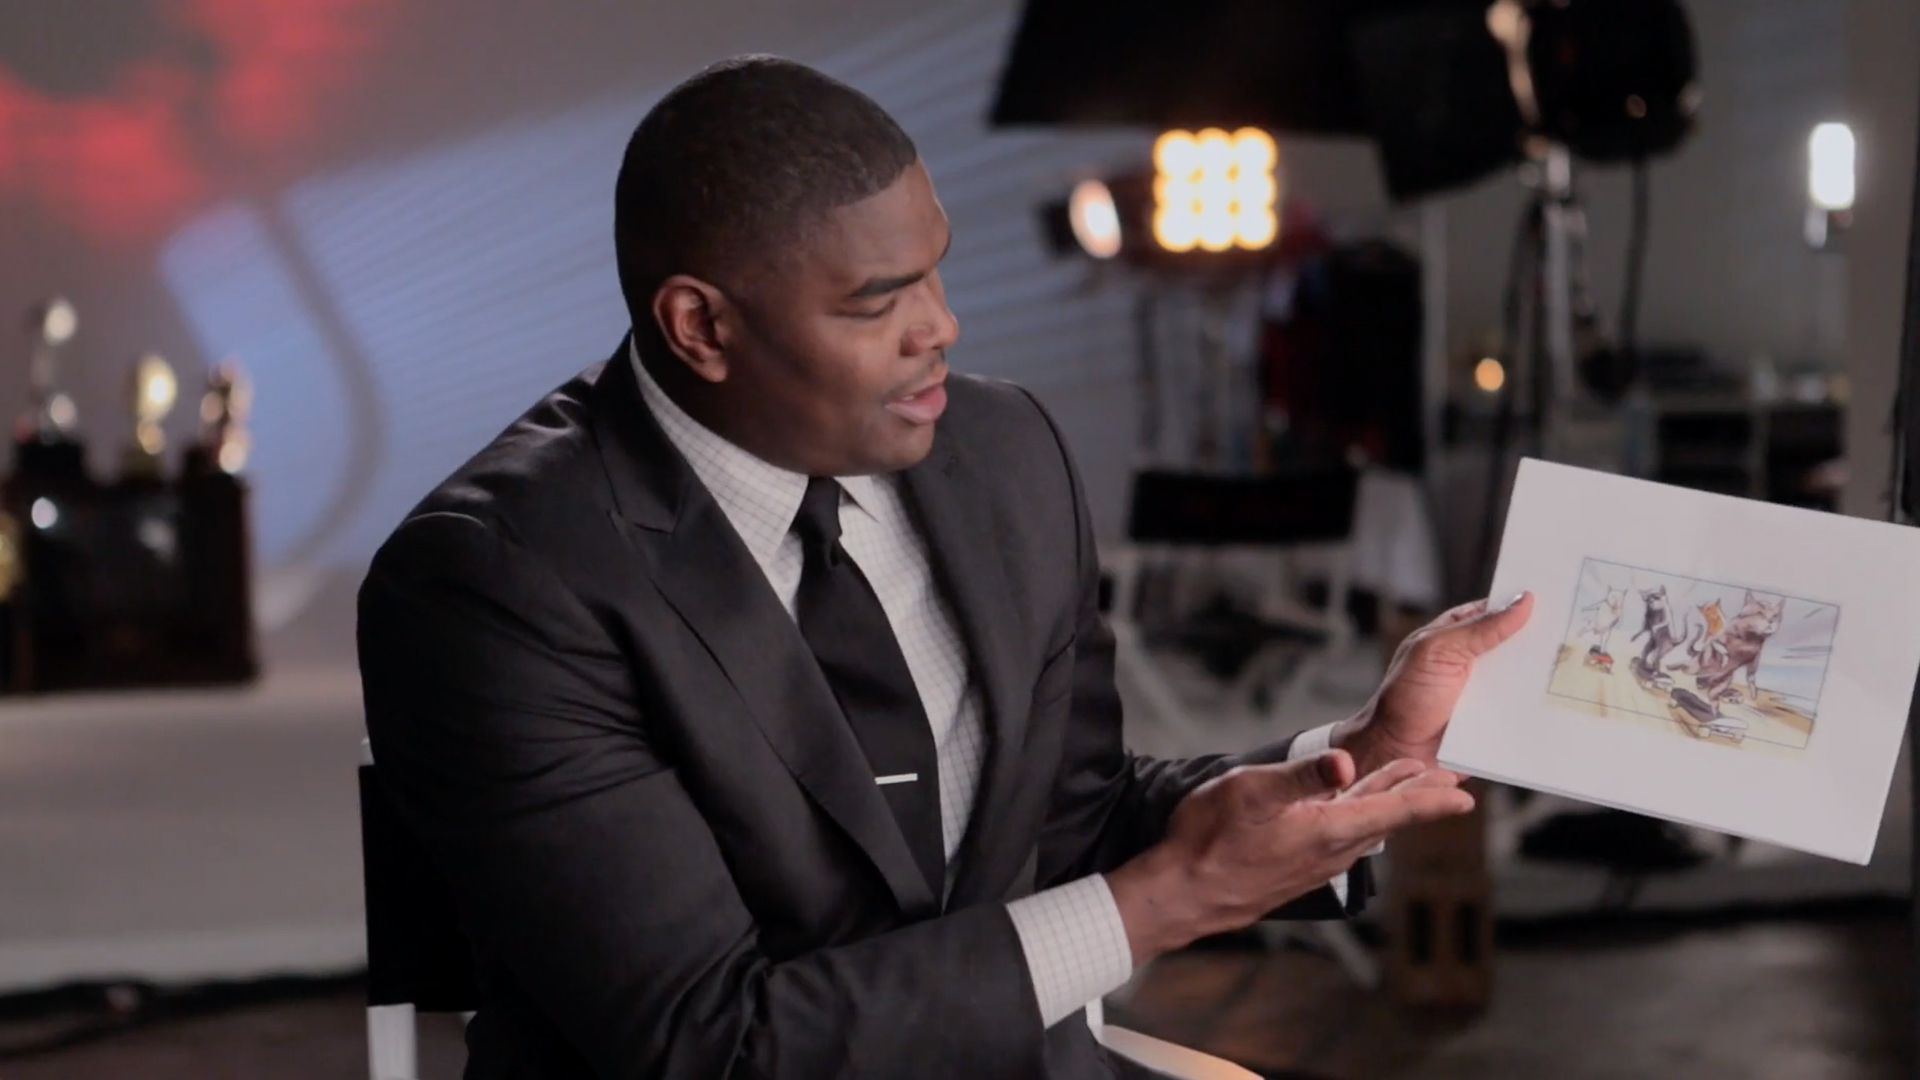 Keyshawn Johnson: Behind the Scenes of the Mega Huge Football Ad We Almost Made